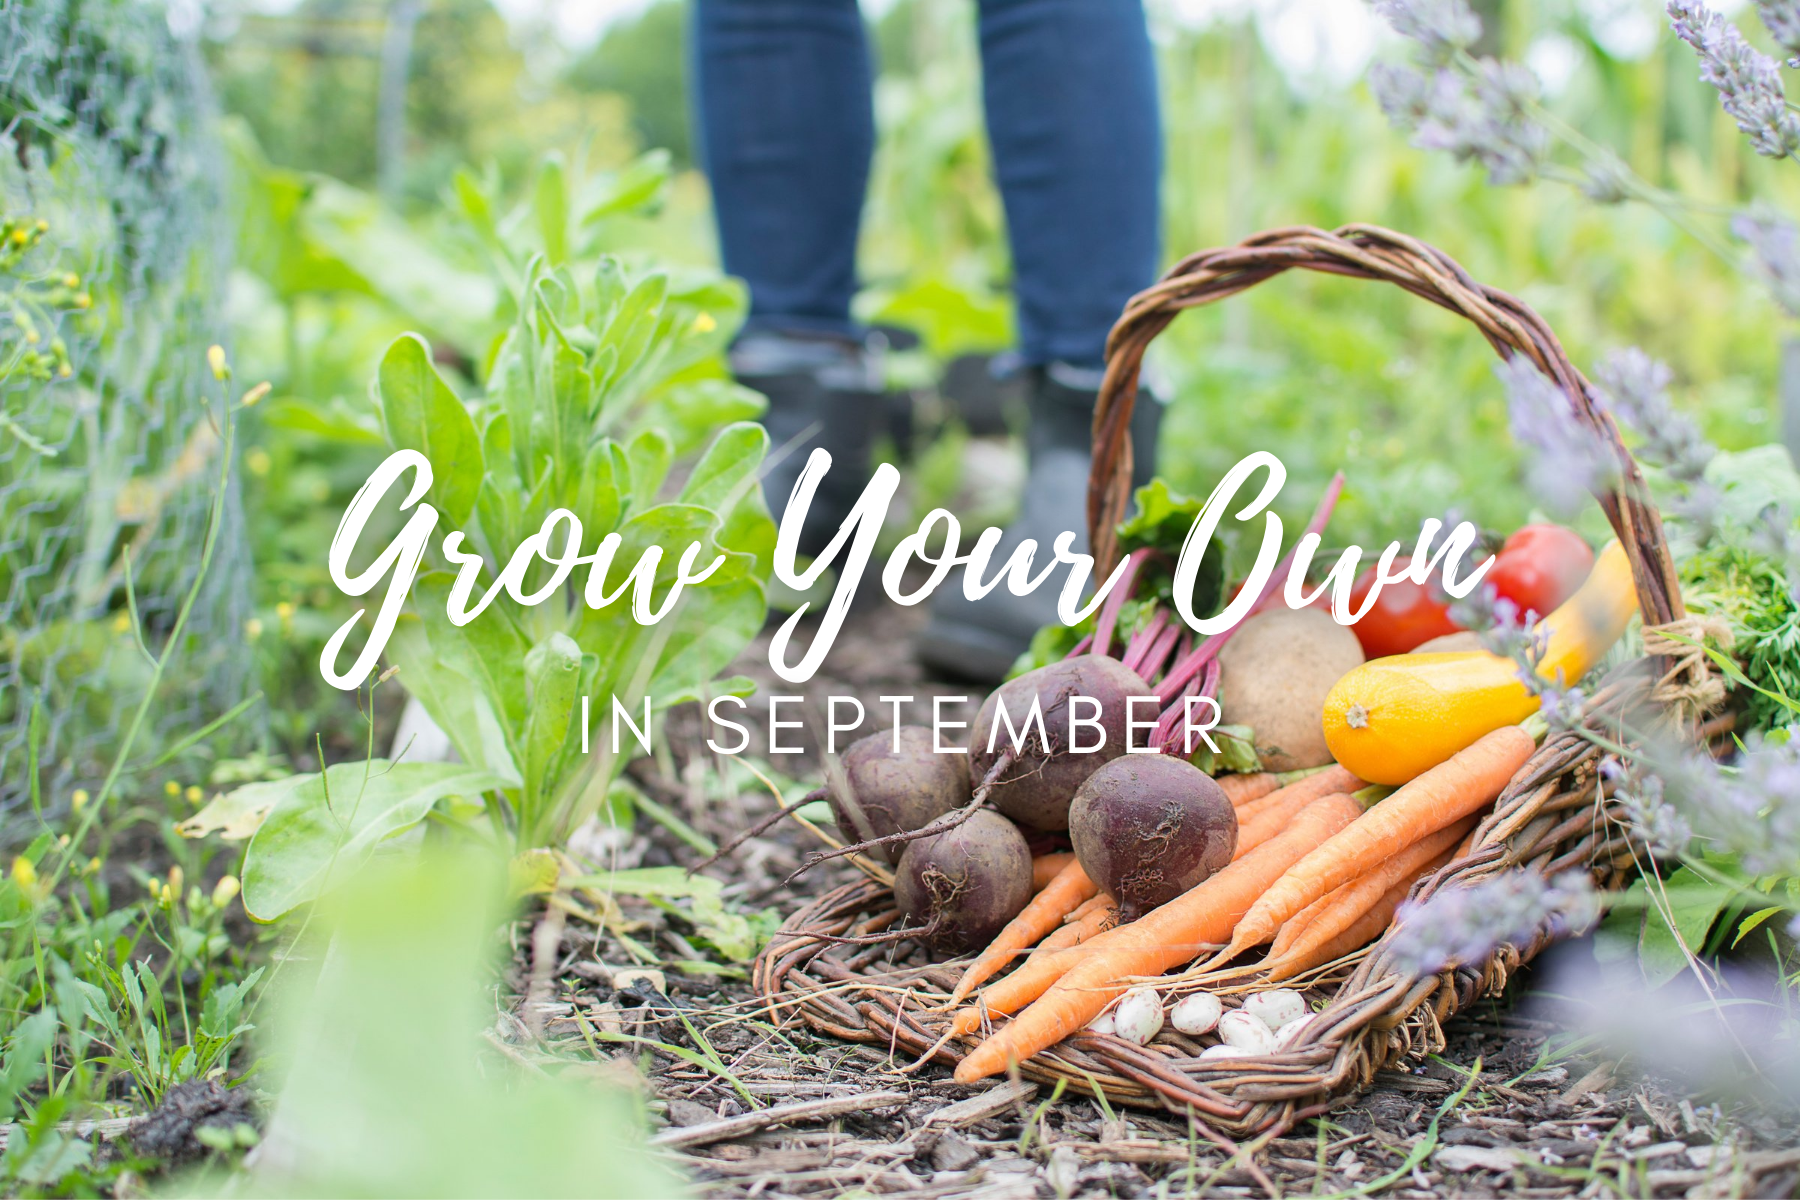 Grow Your Own in September